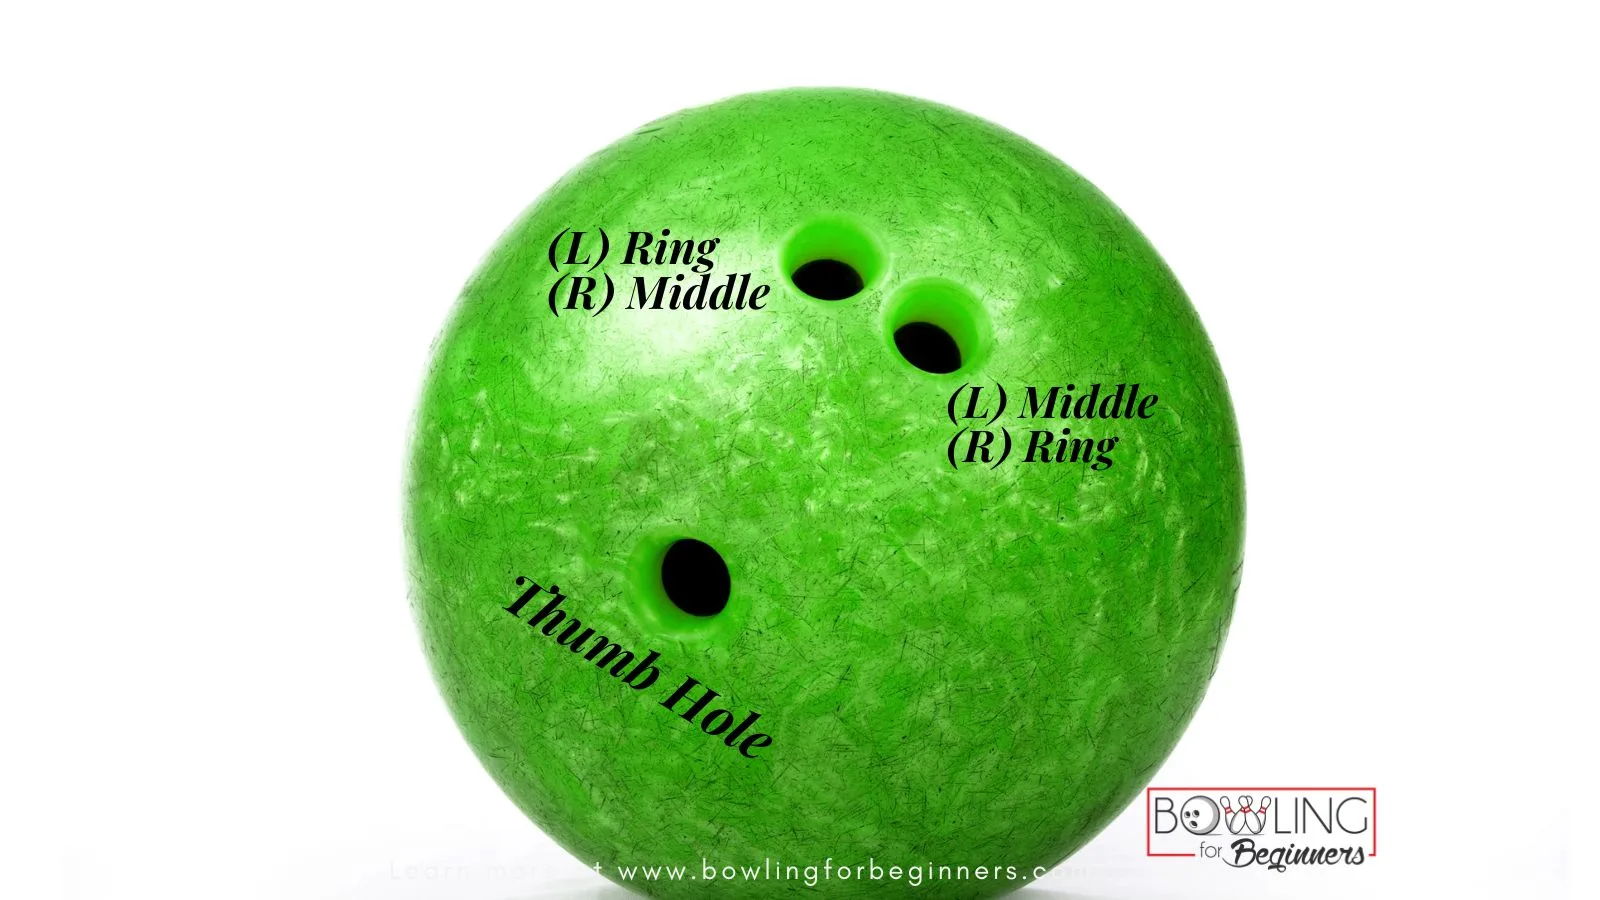 The green house ball is best used as a straight ball or spare